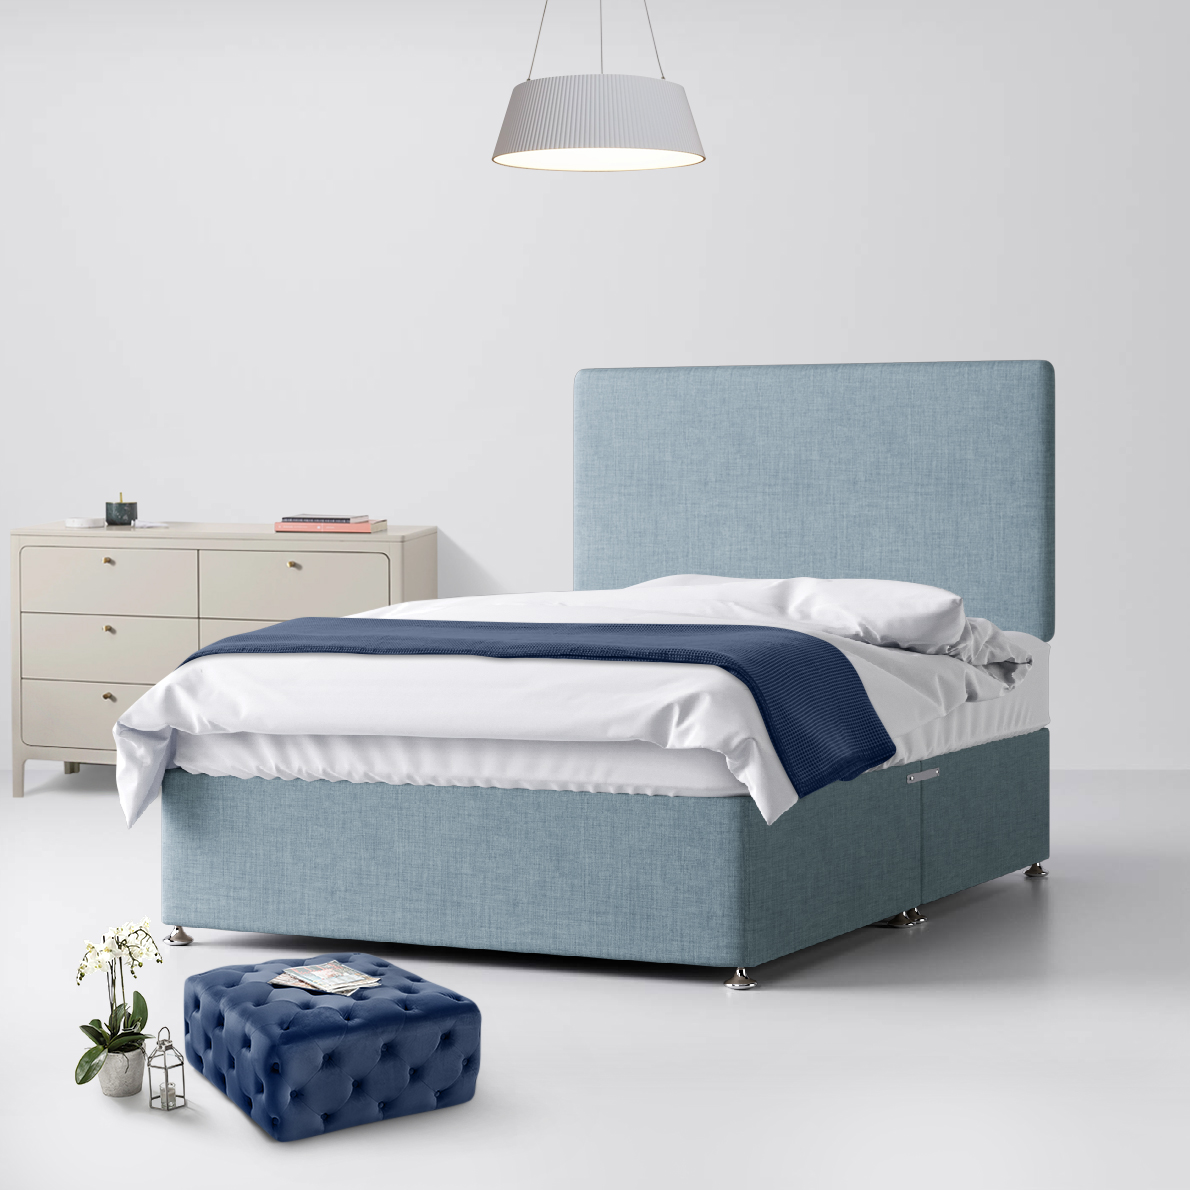 Small Single - Divan Bed and Cornell Plain Headboard - Duck Egg Blue - Fabric - 2ft6 - Happy Beds